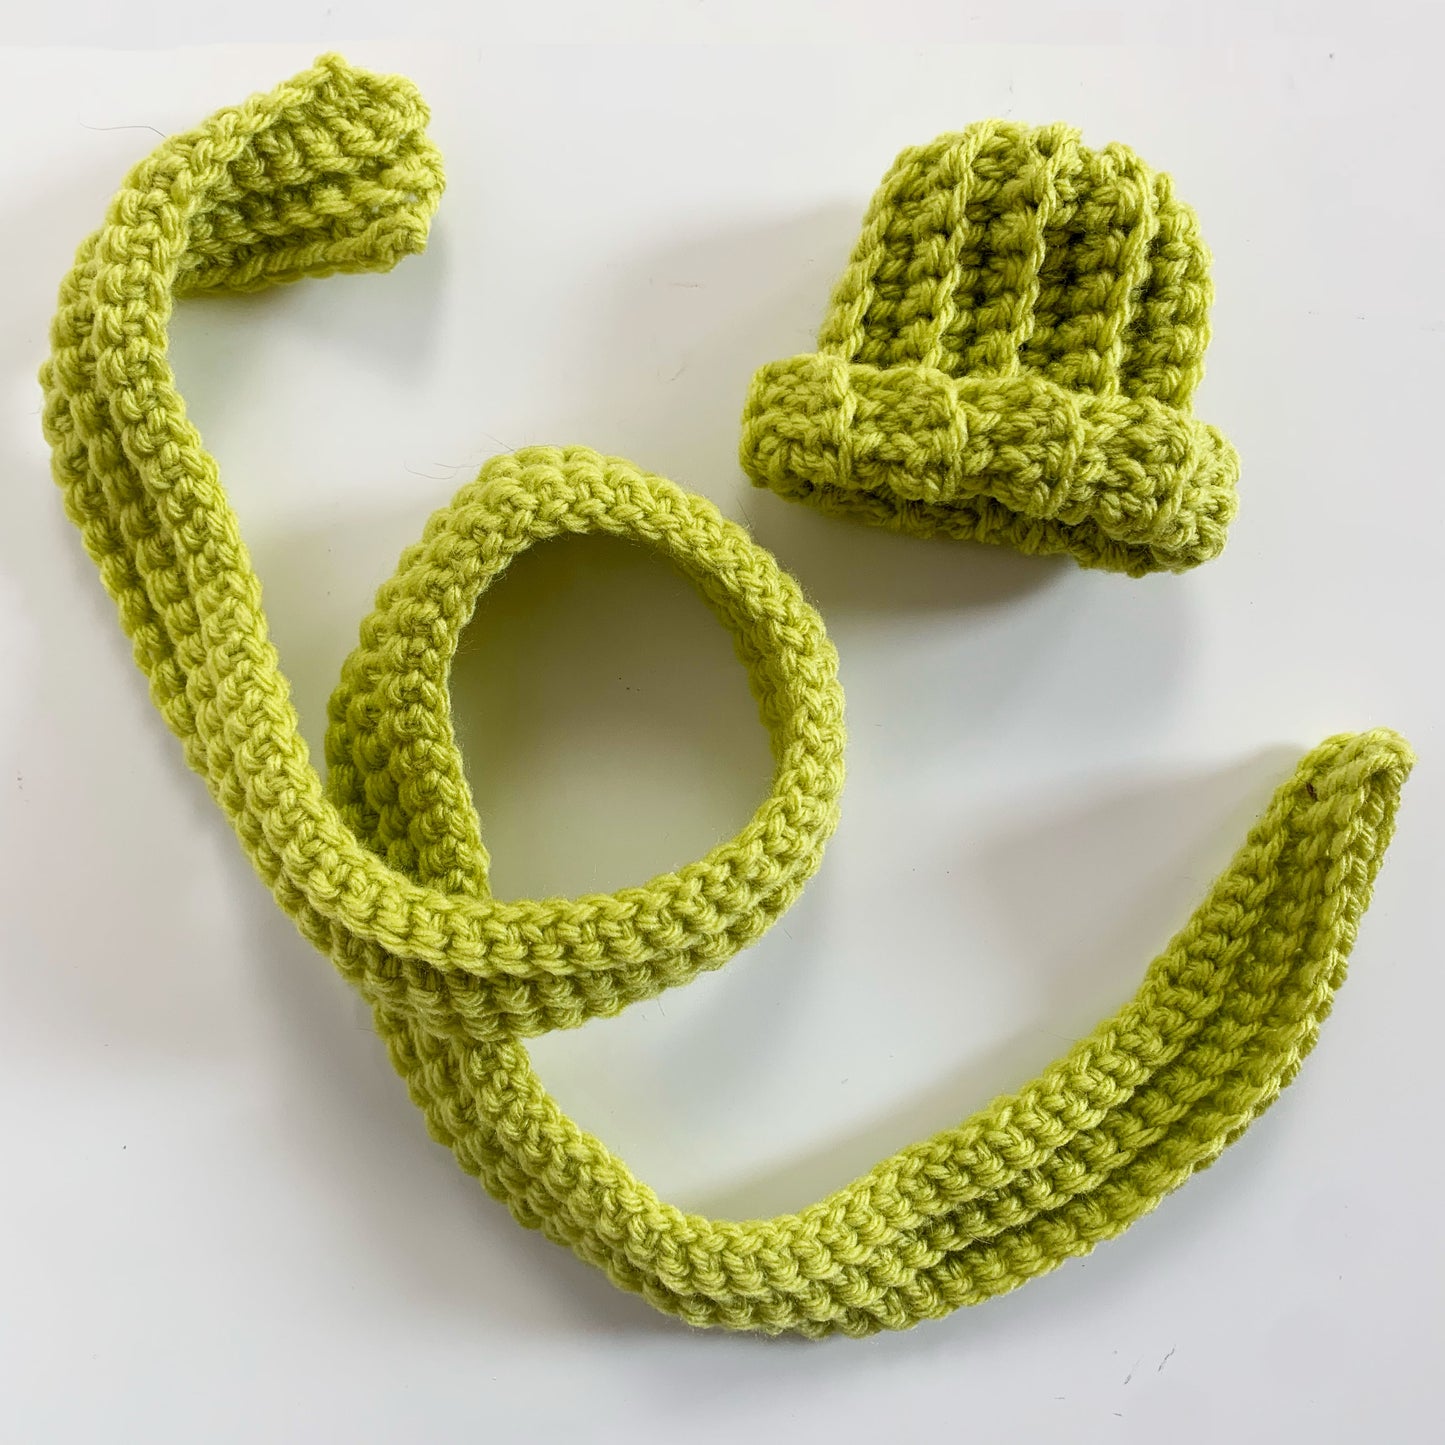 Crochet Hat and Scarf Set